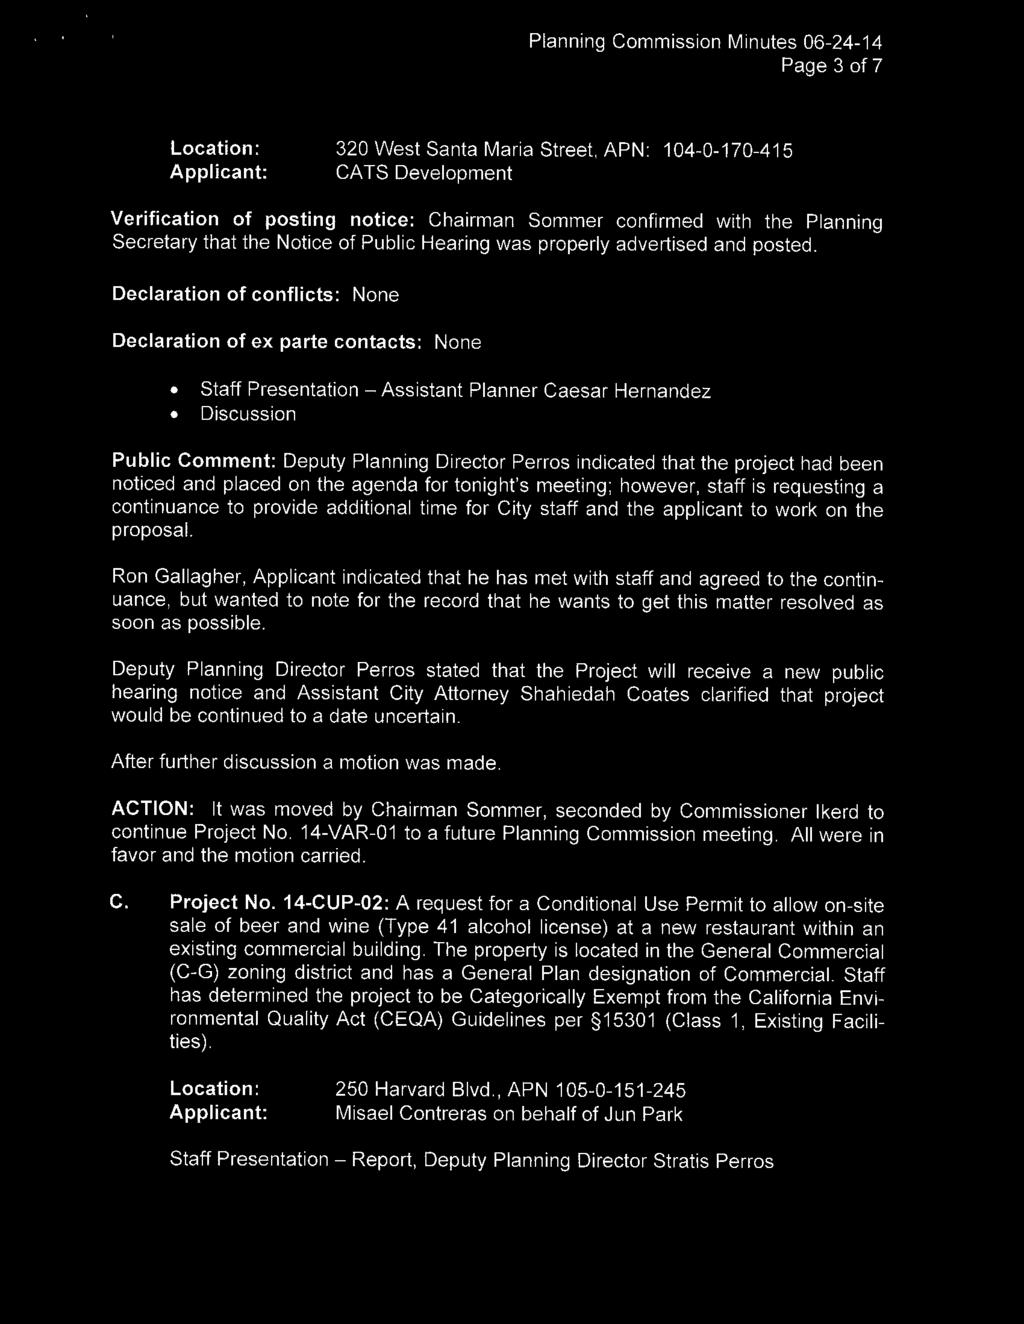 Page 3 of 7 Location: Applicant: 320 West Santa Maria Street, APN: 104-0-170-415 CATS Development Verification of posting notice: Chairman Sommer confirmed with the Planning Secretary that the Notice